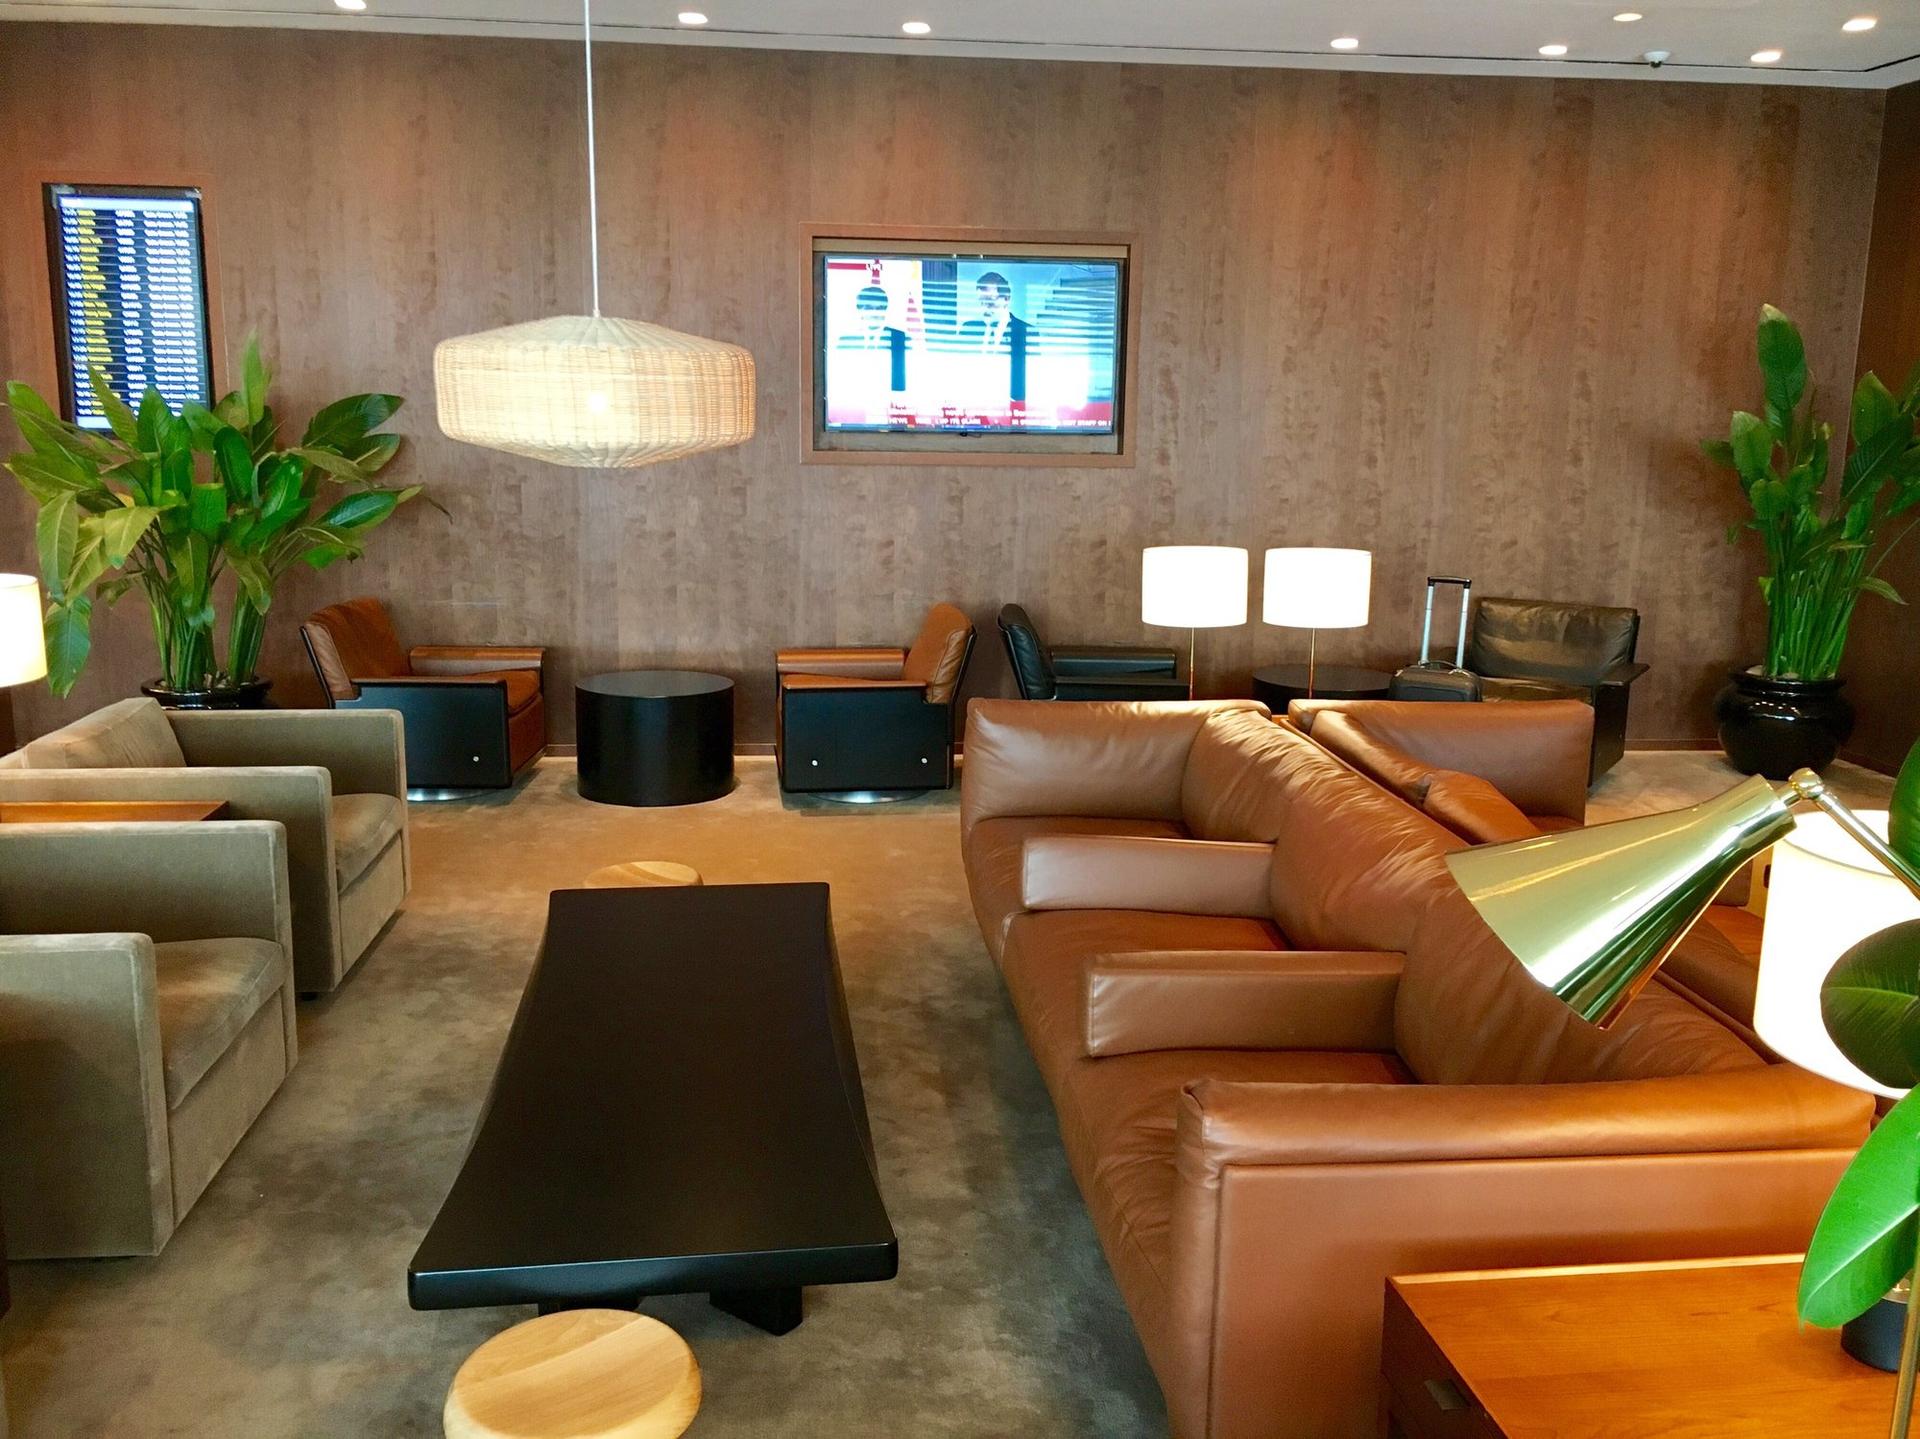 Cathay Pacific Business Class Lounge image 5 of 48